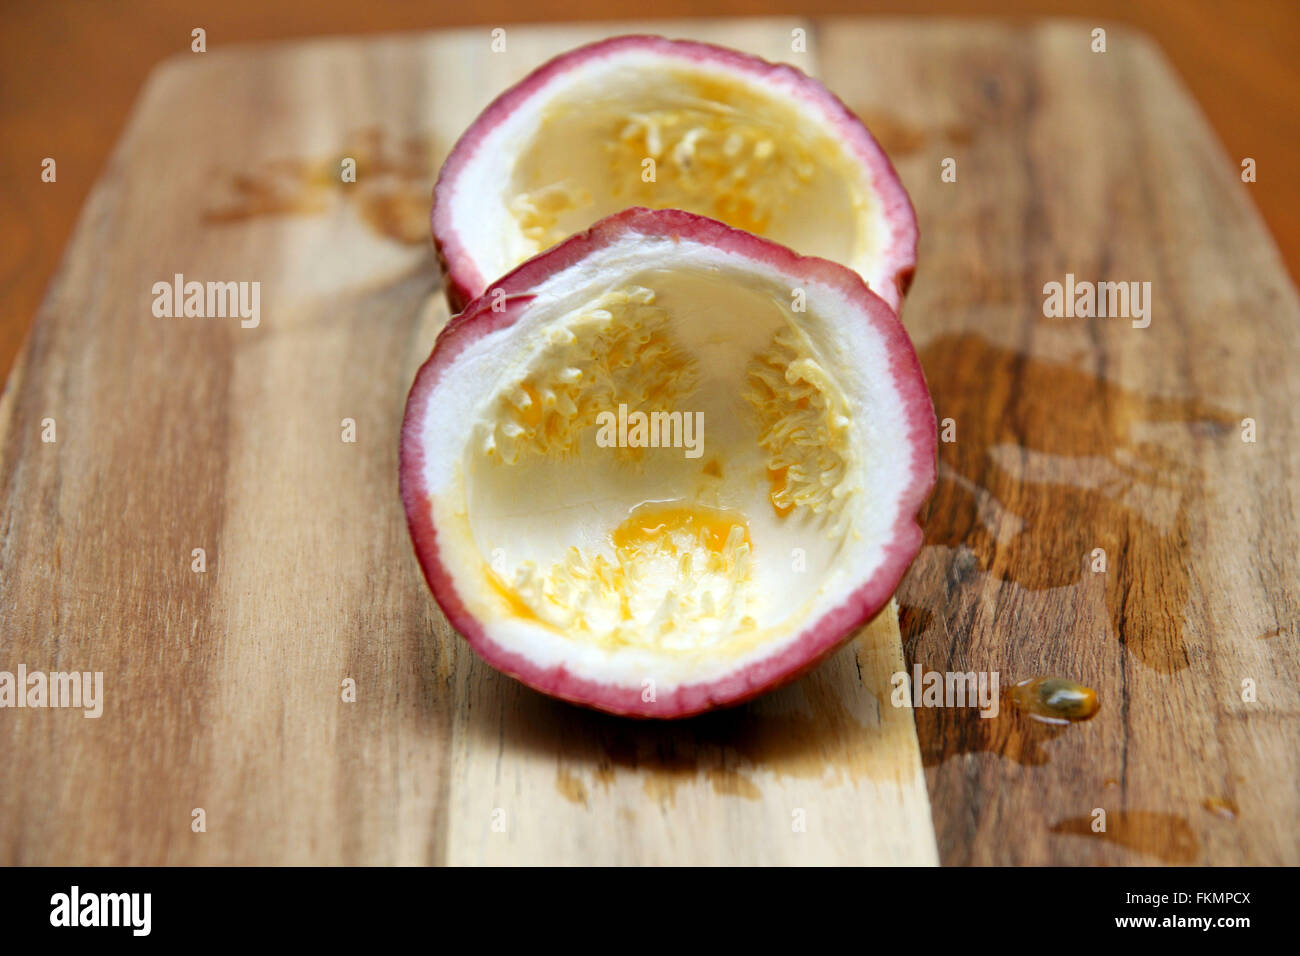 empty passion fruit on chopping board Stock Photo